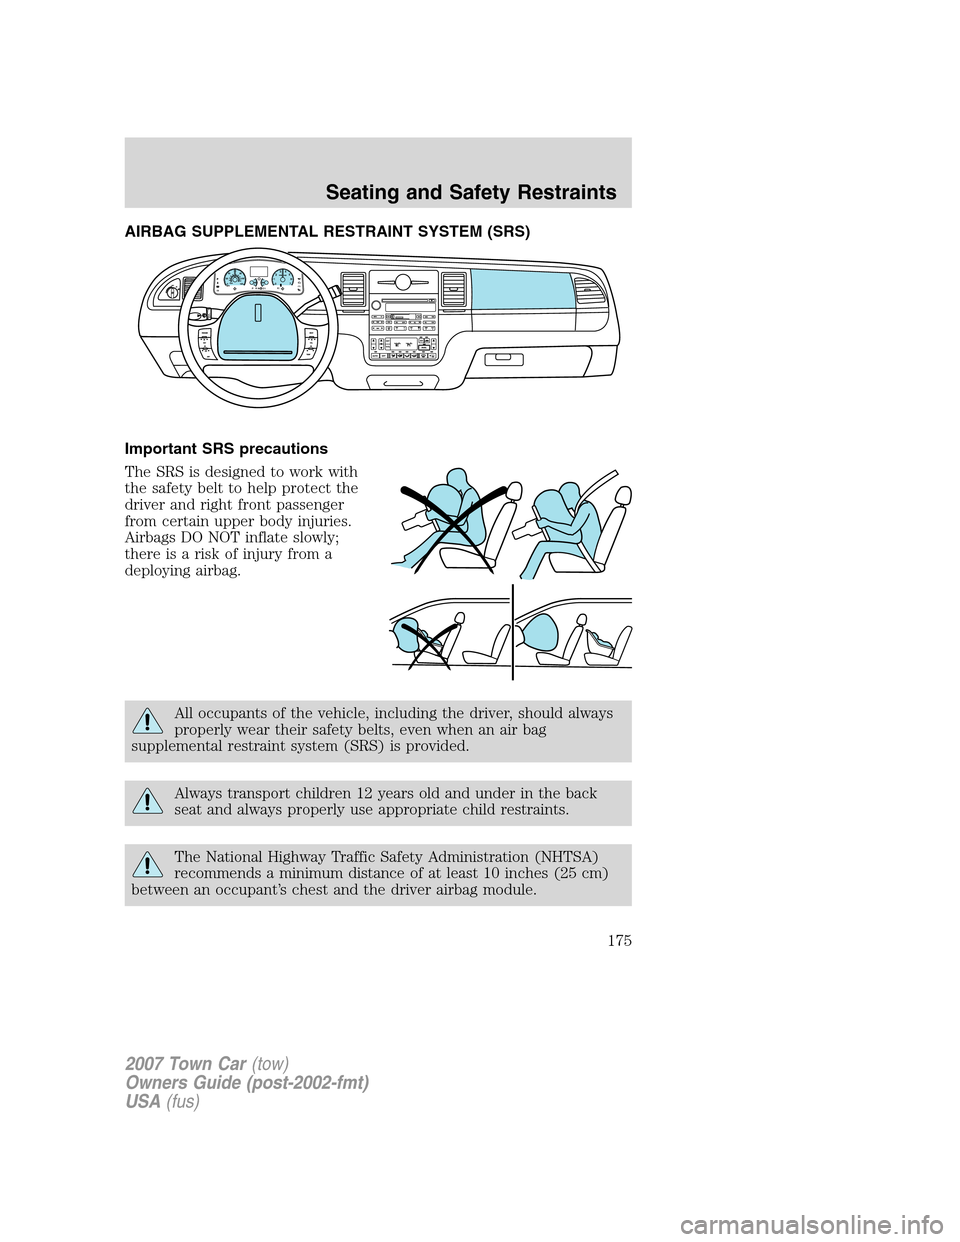 LINCOLN TOWN CAR 2007 User Guide AIRBAG SUPPLEMENTAL RESTRAINT SYSTEM (SRS)
Important SRS precautions
The SRS is designed to work with
the safety belt to help protect the
driver and right front passenger
from certain upper body injur